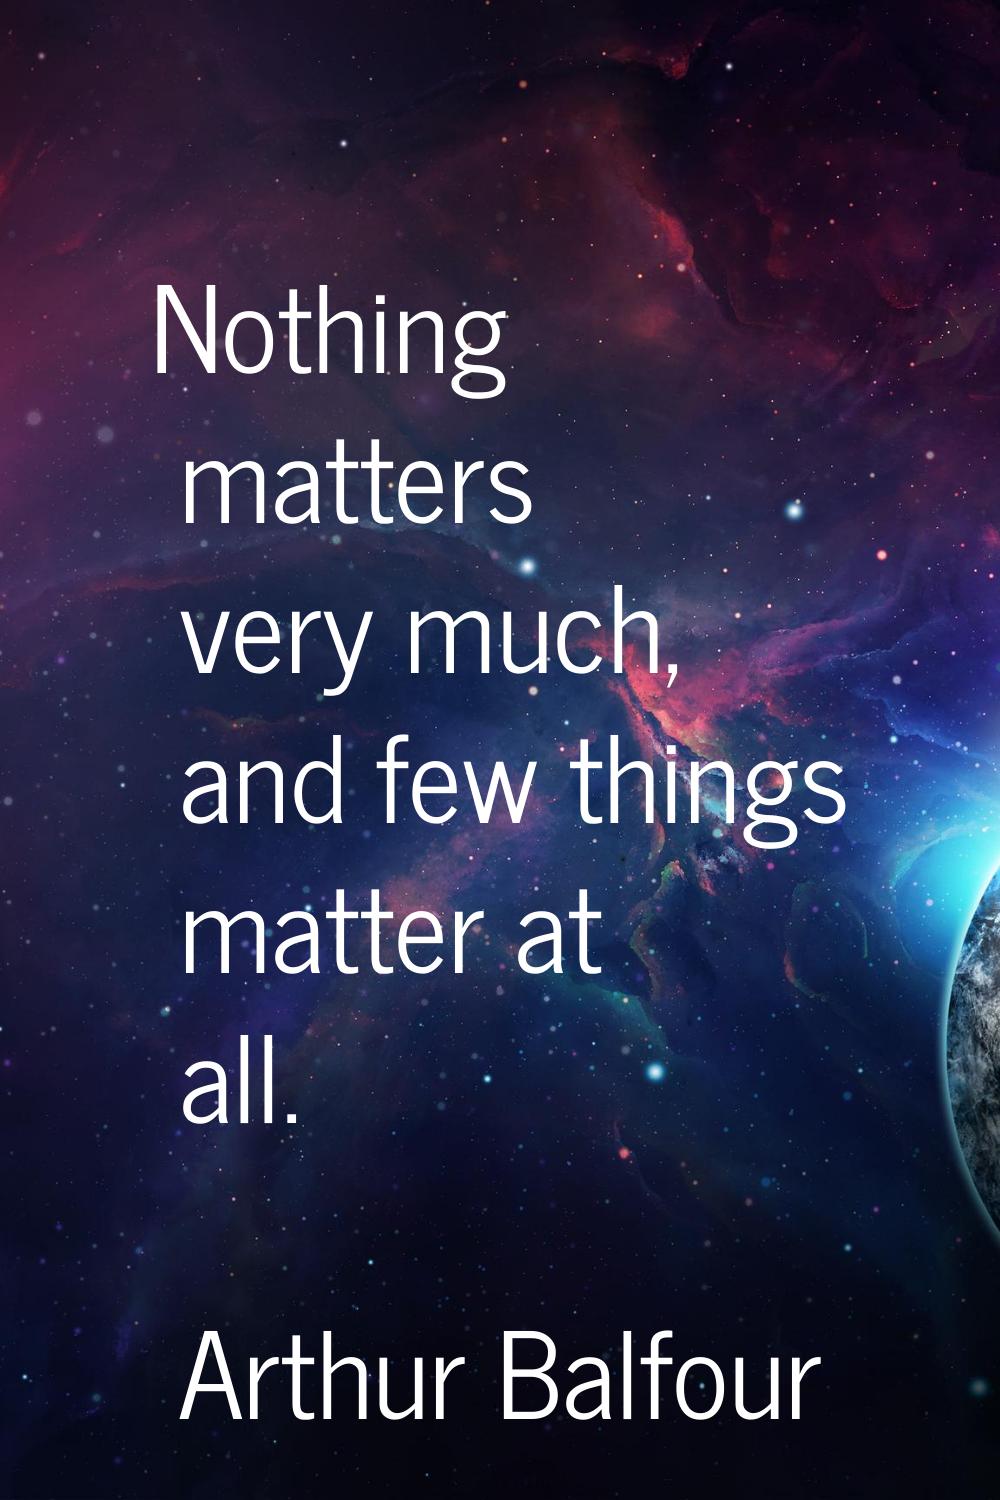 Nothing matters very much, and few things matter at all.